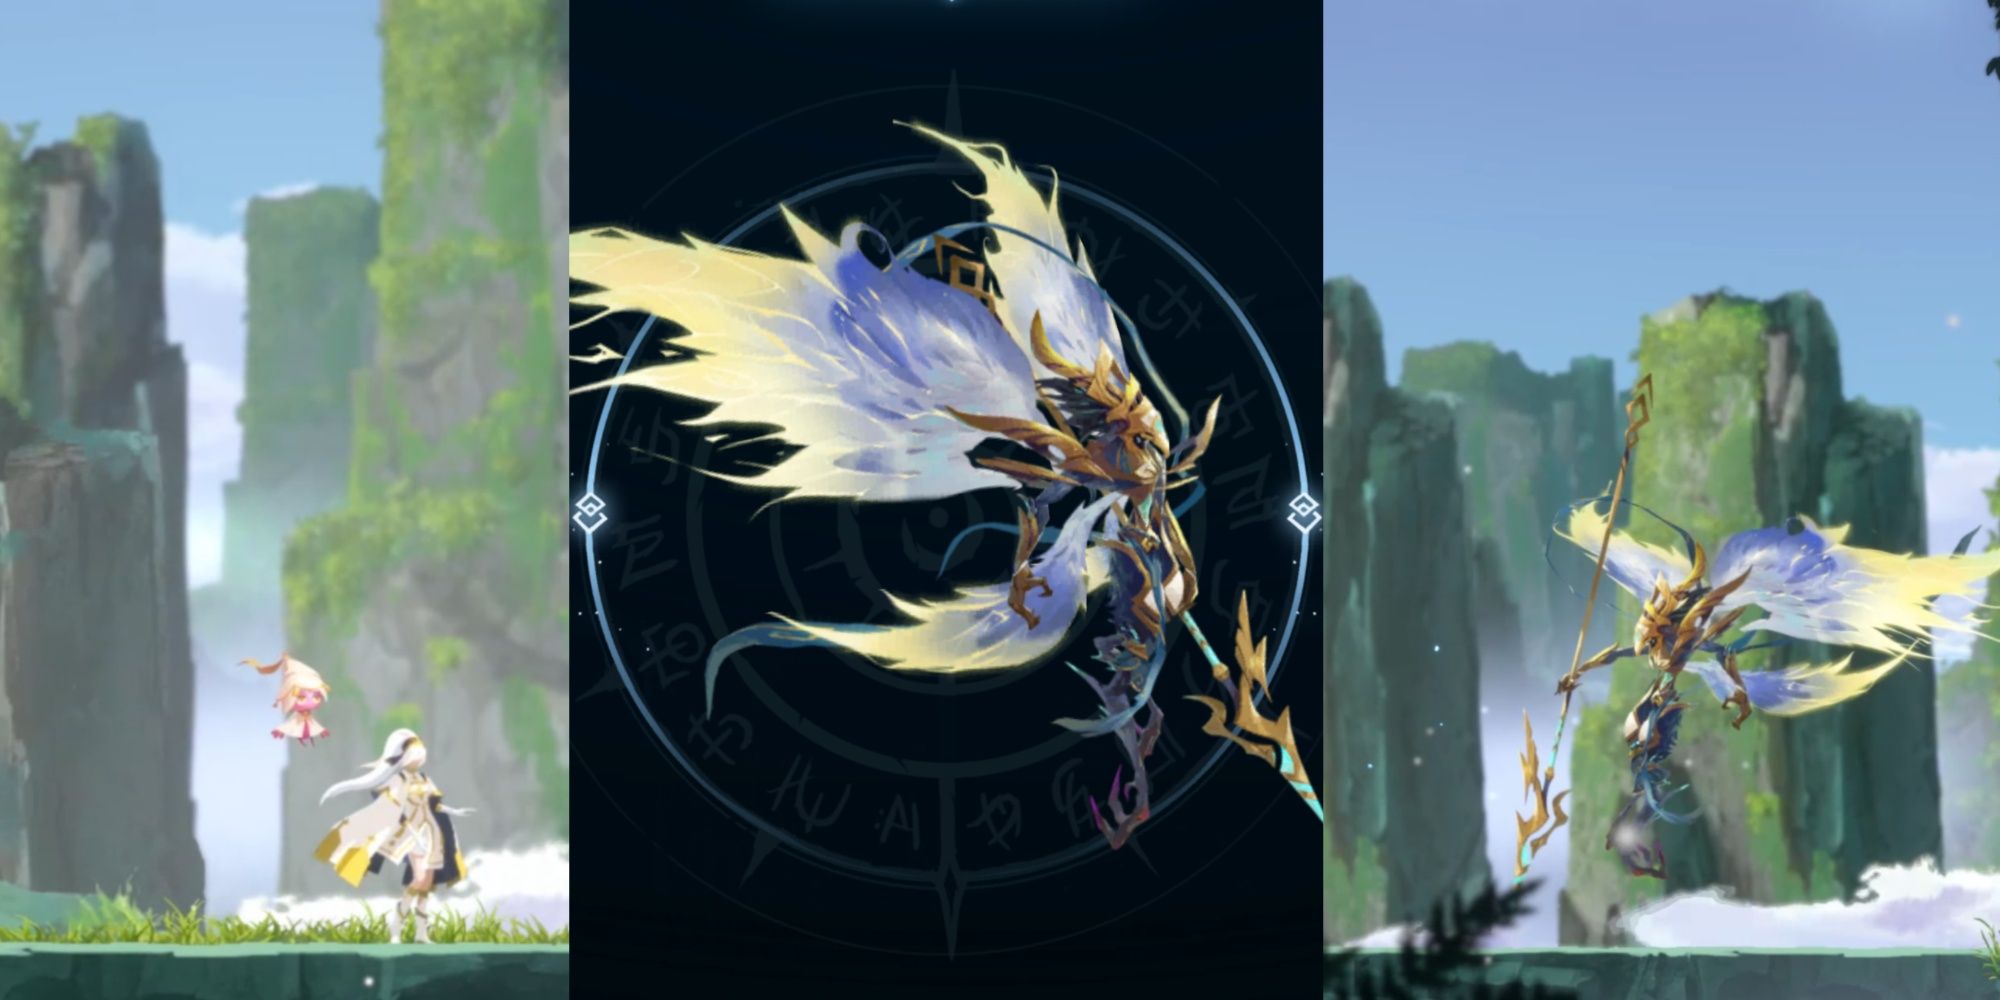 A collage of images of Renee approaching Loss, the Galefeather in Afterimage, along with a portrait of Loss, the Galefeather